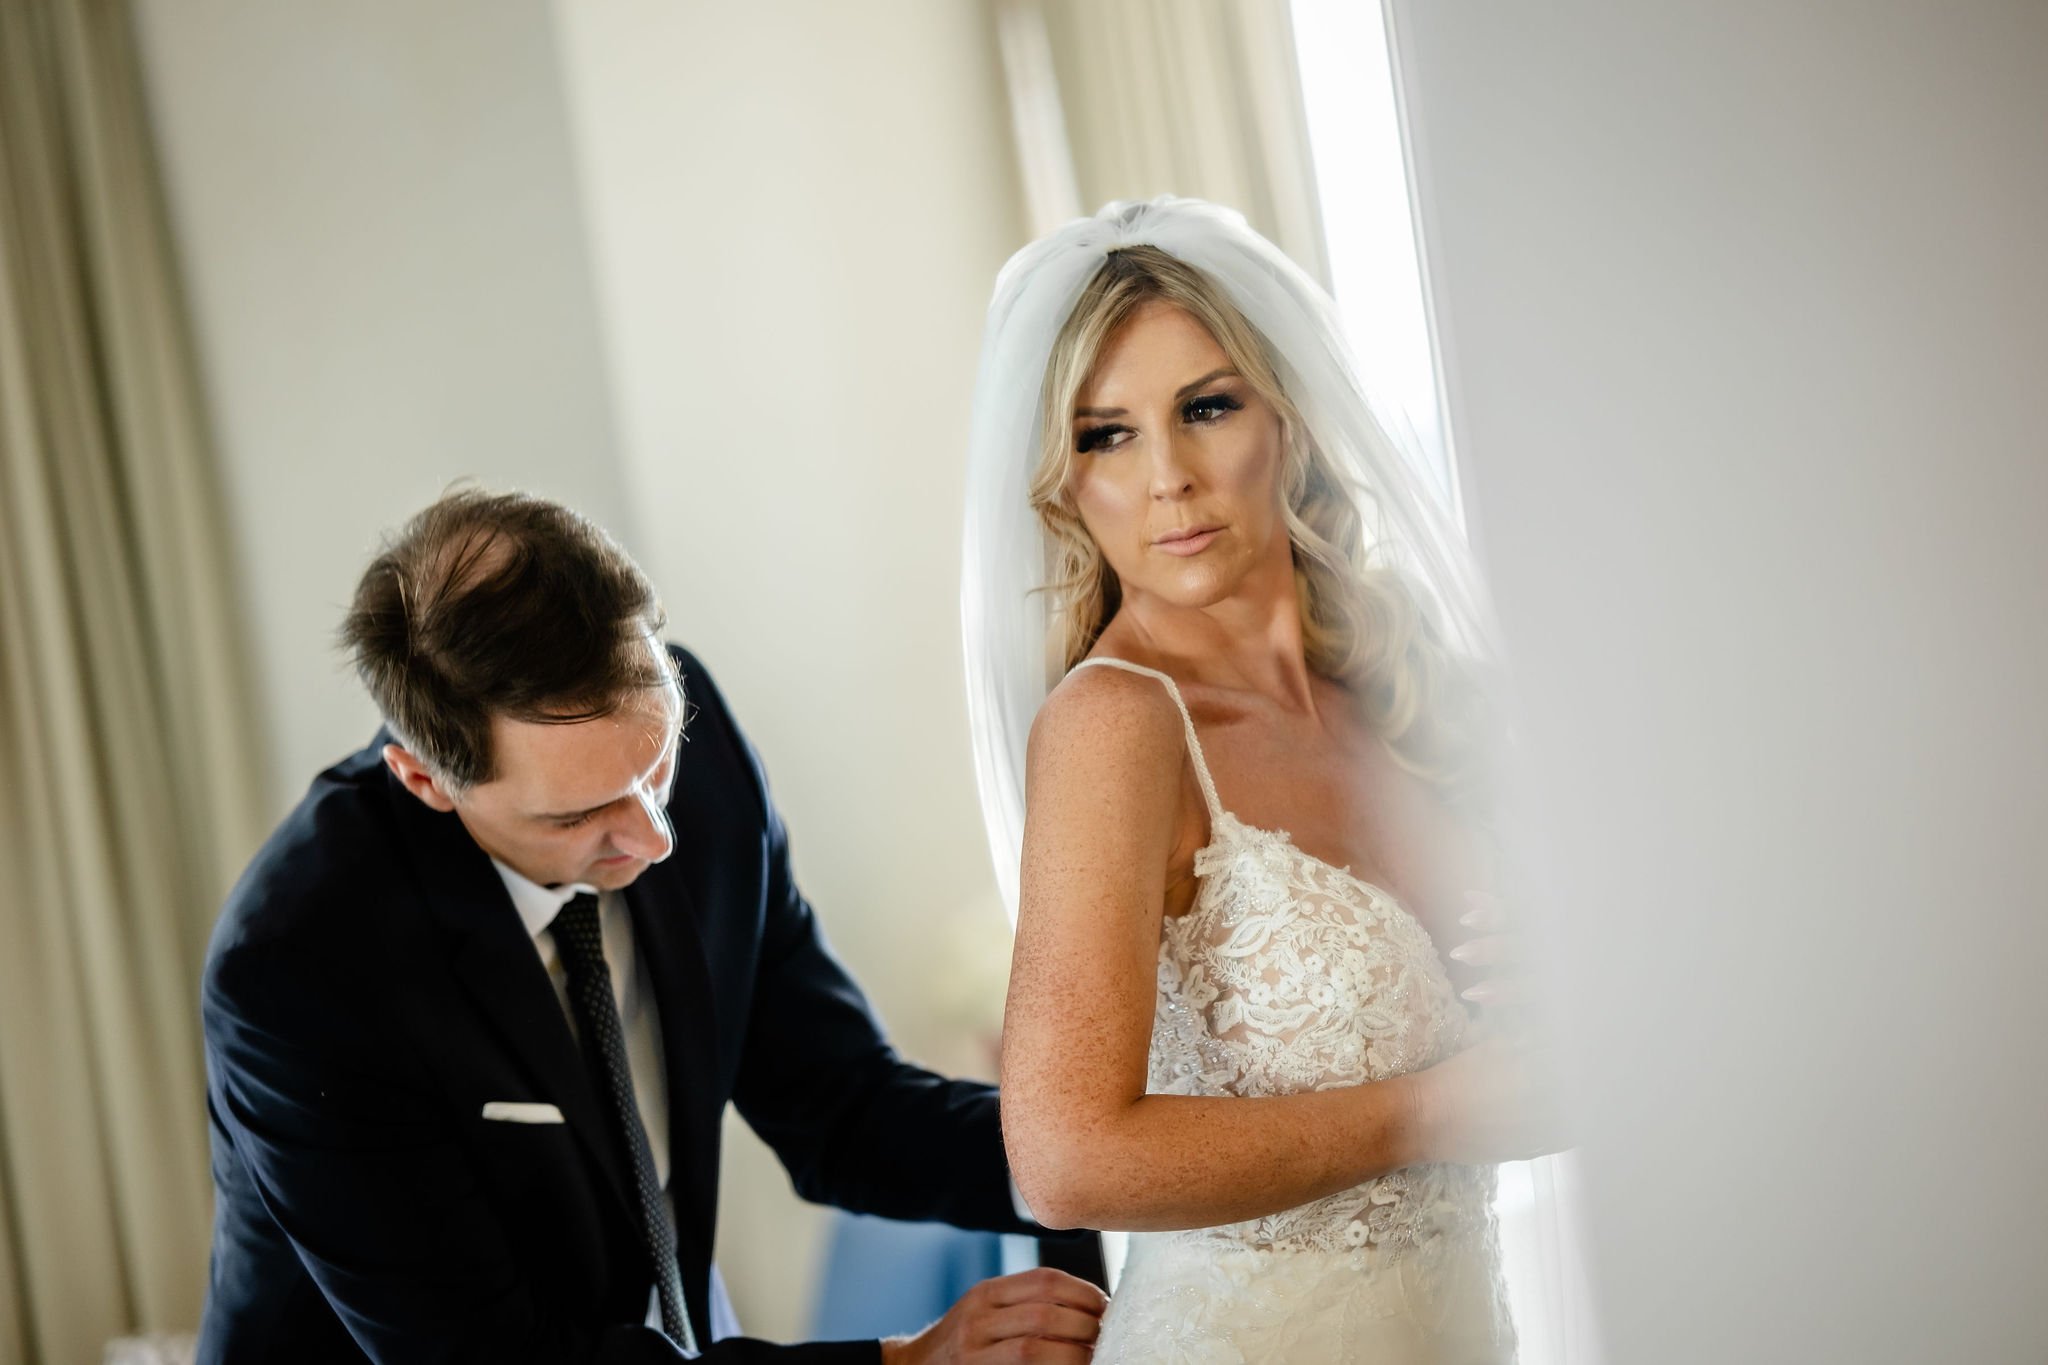 Photos of a bride getting ready for her wedding at the Westin hotel